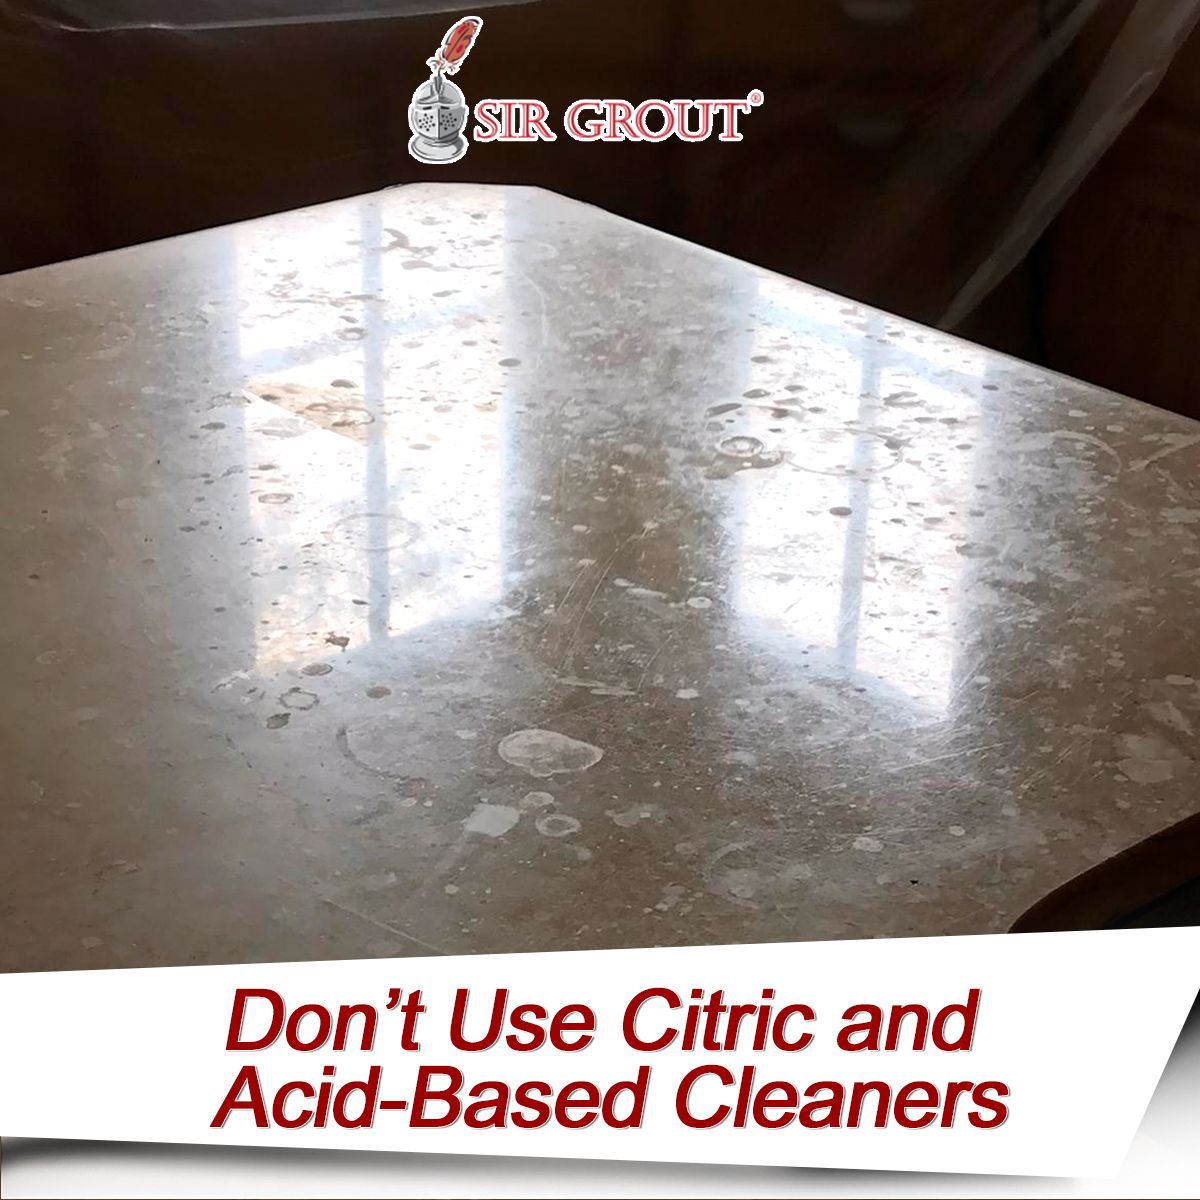 Don't Use Citric and Acid-Based Cleaners